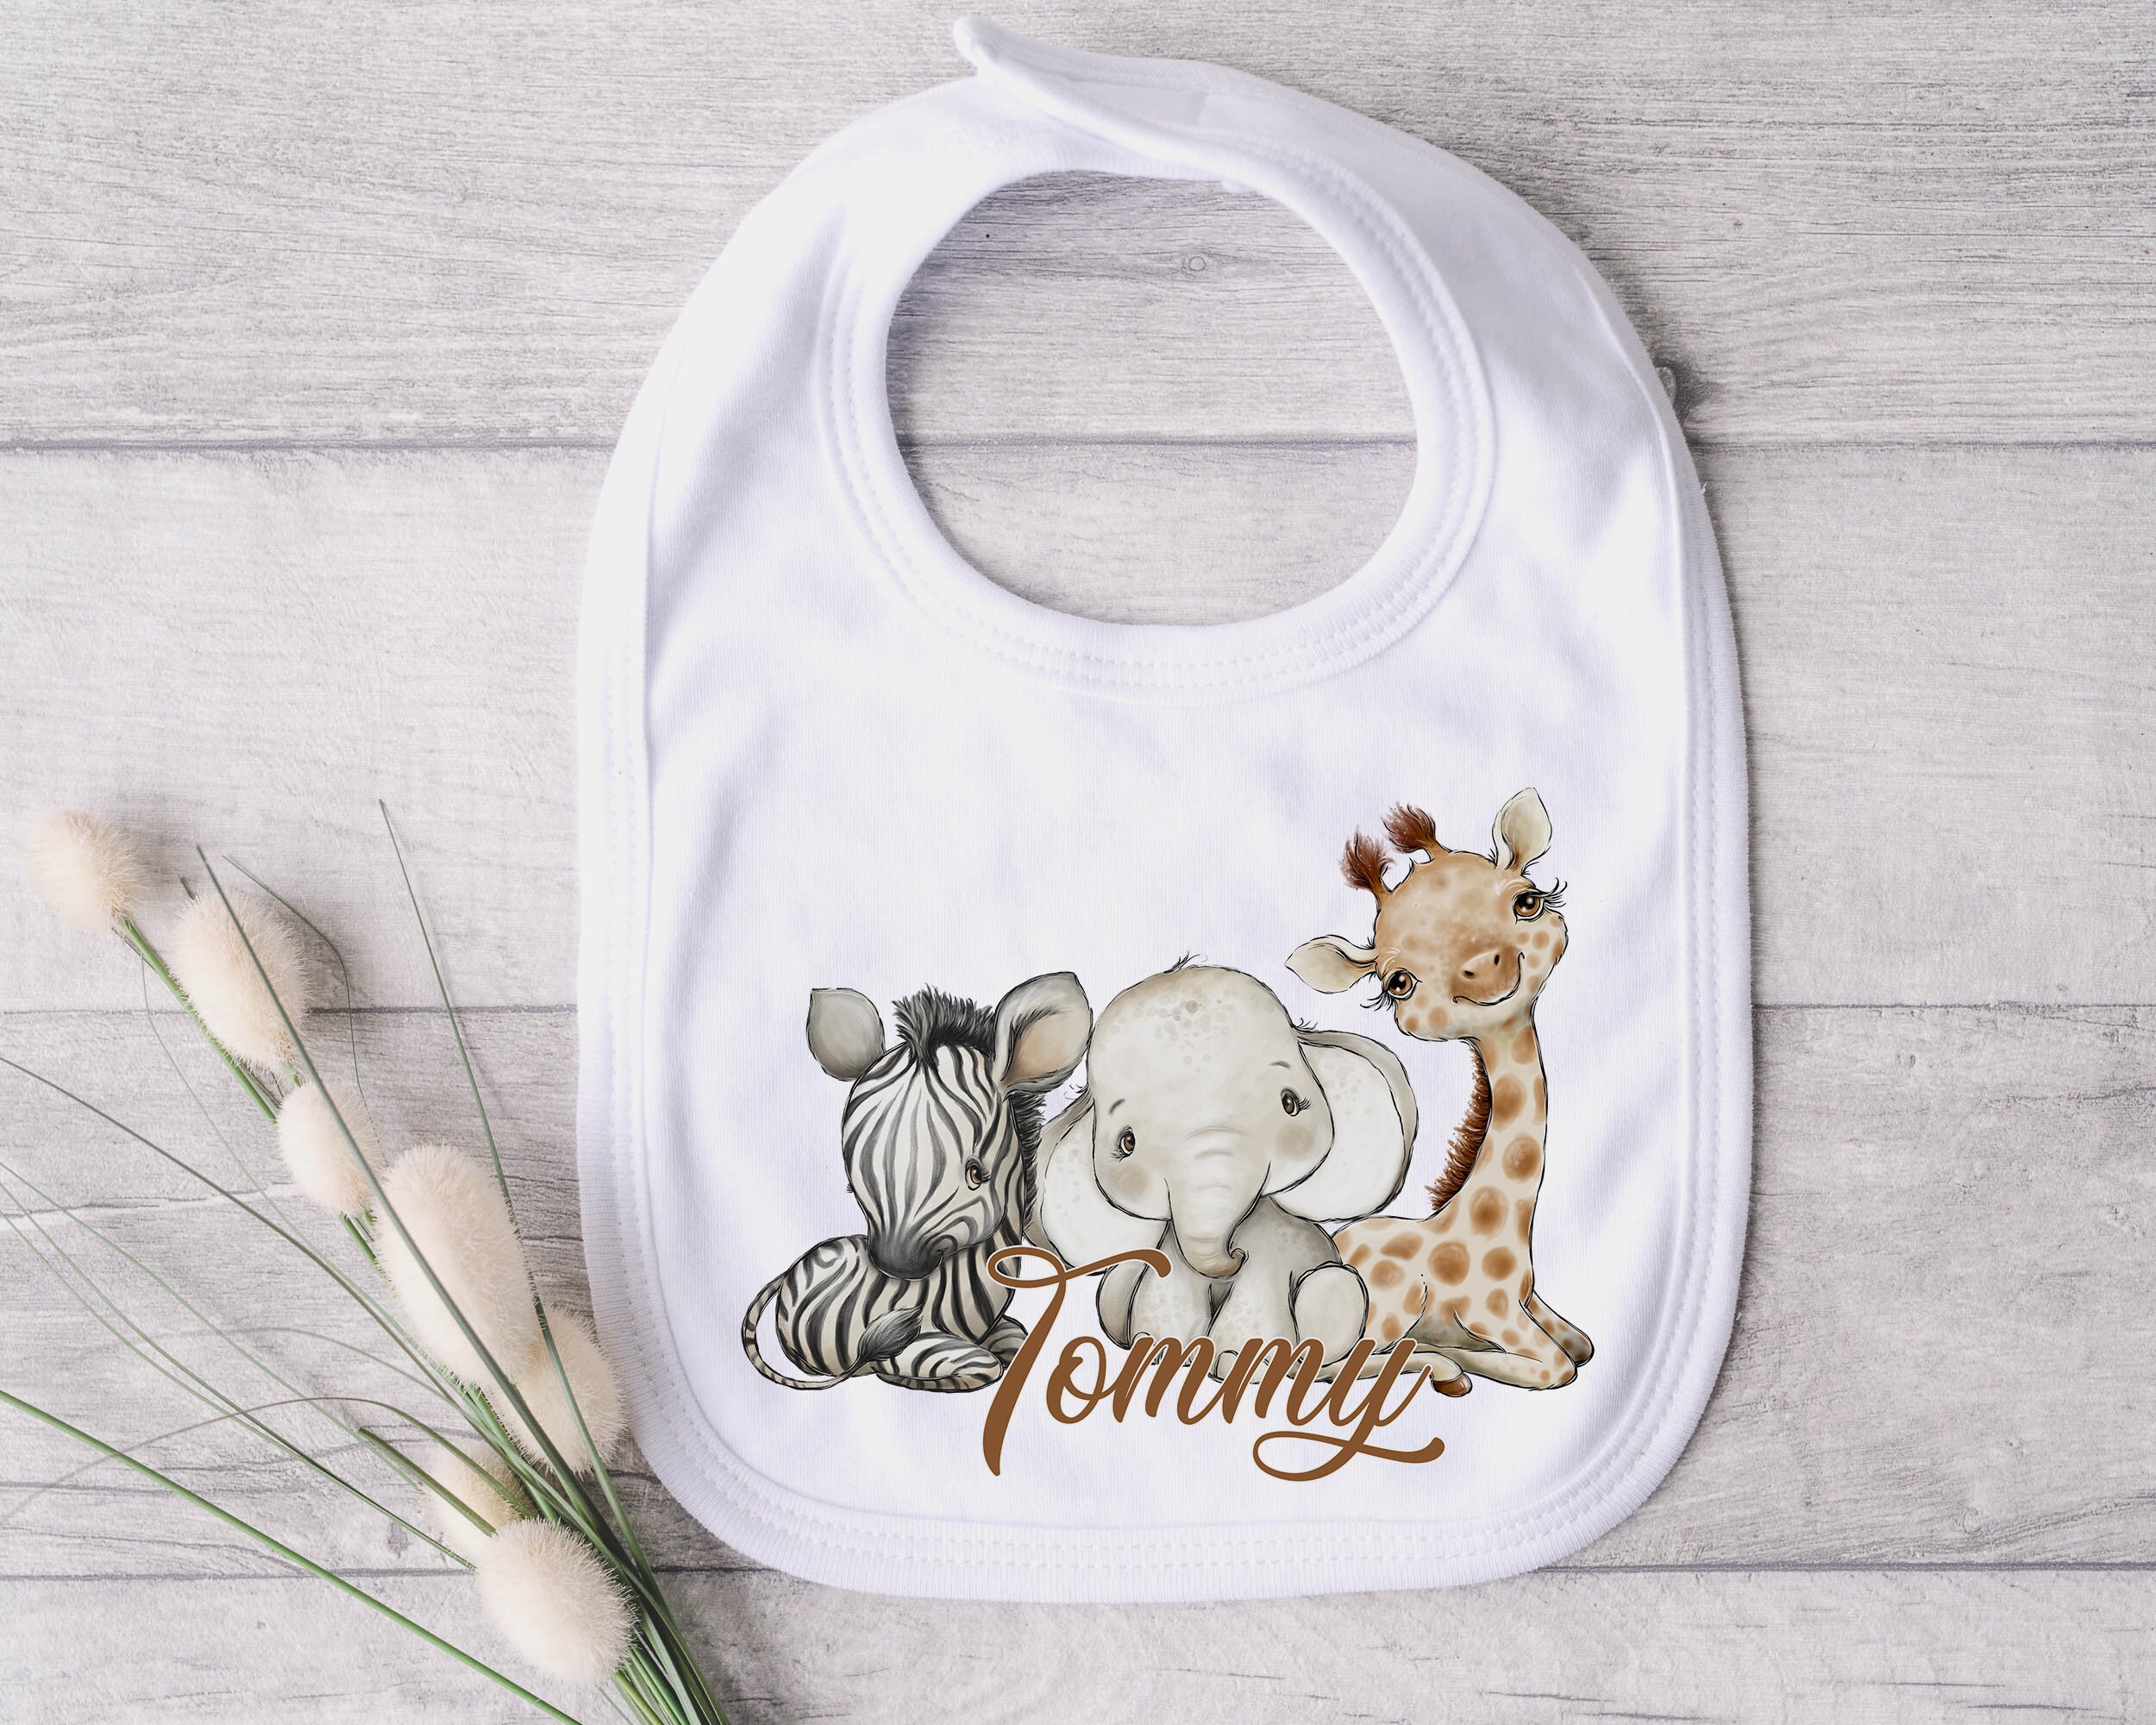 PERSONALISED YOUR OWN PHOTO BABY BIB TOWELLING COTTON & POLYESTER VELCRO FIXING 